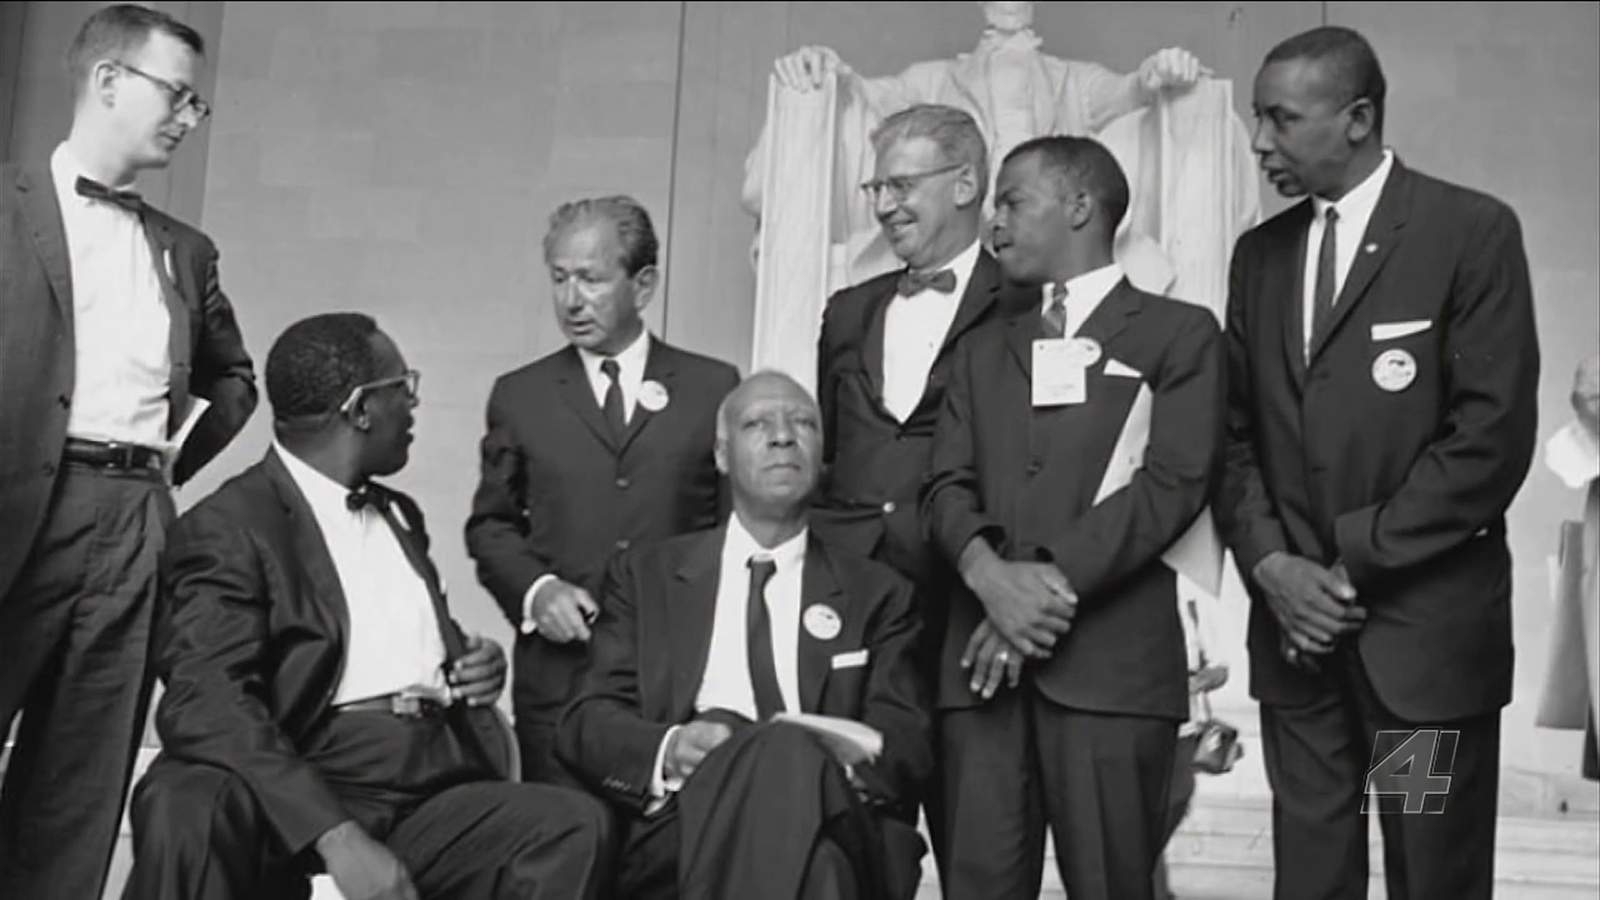 A. Philip Randolph is more than a road. He paved the way for modern civil rights